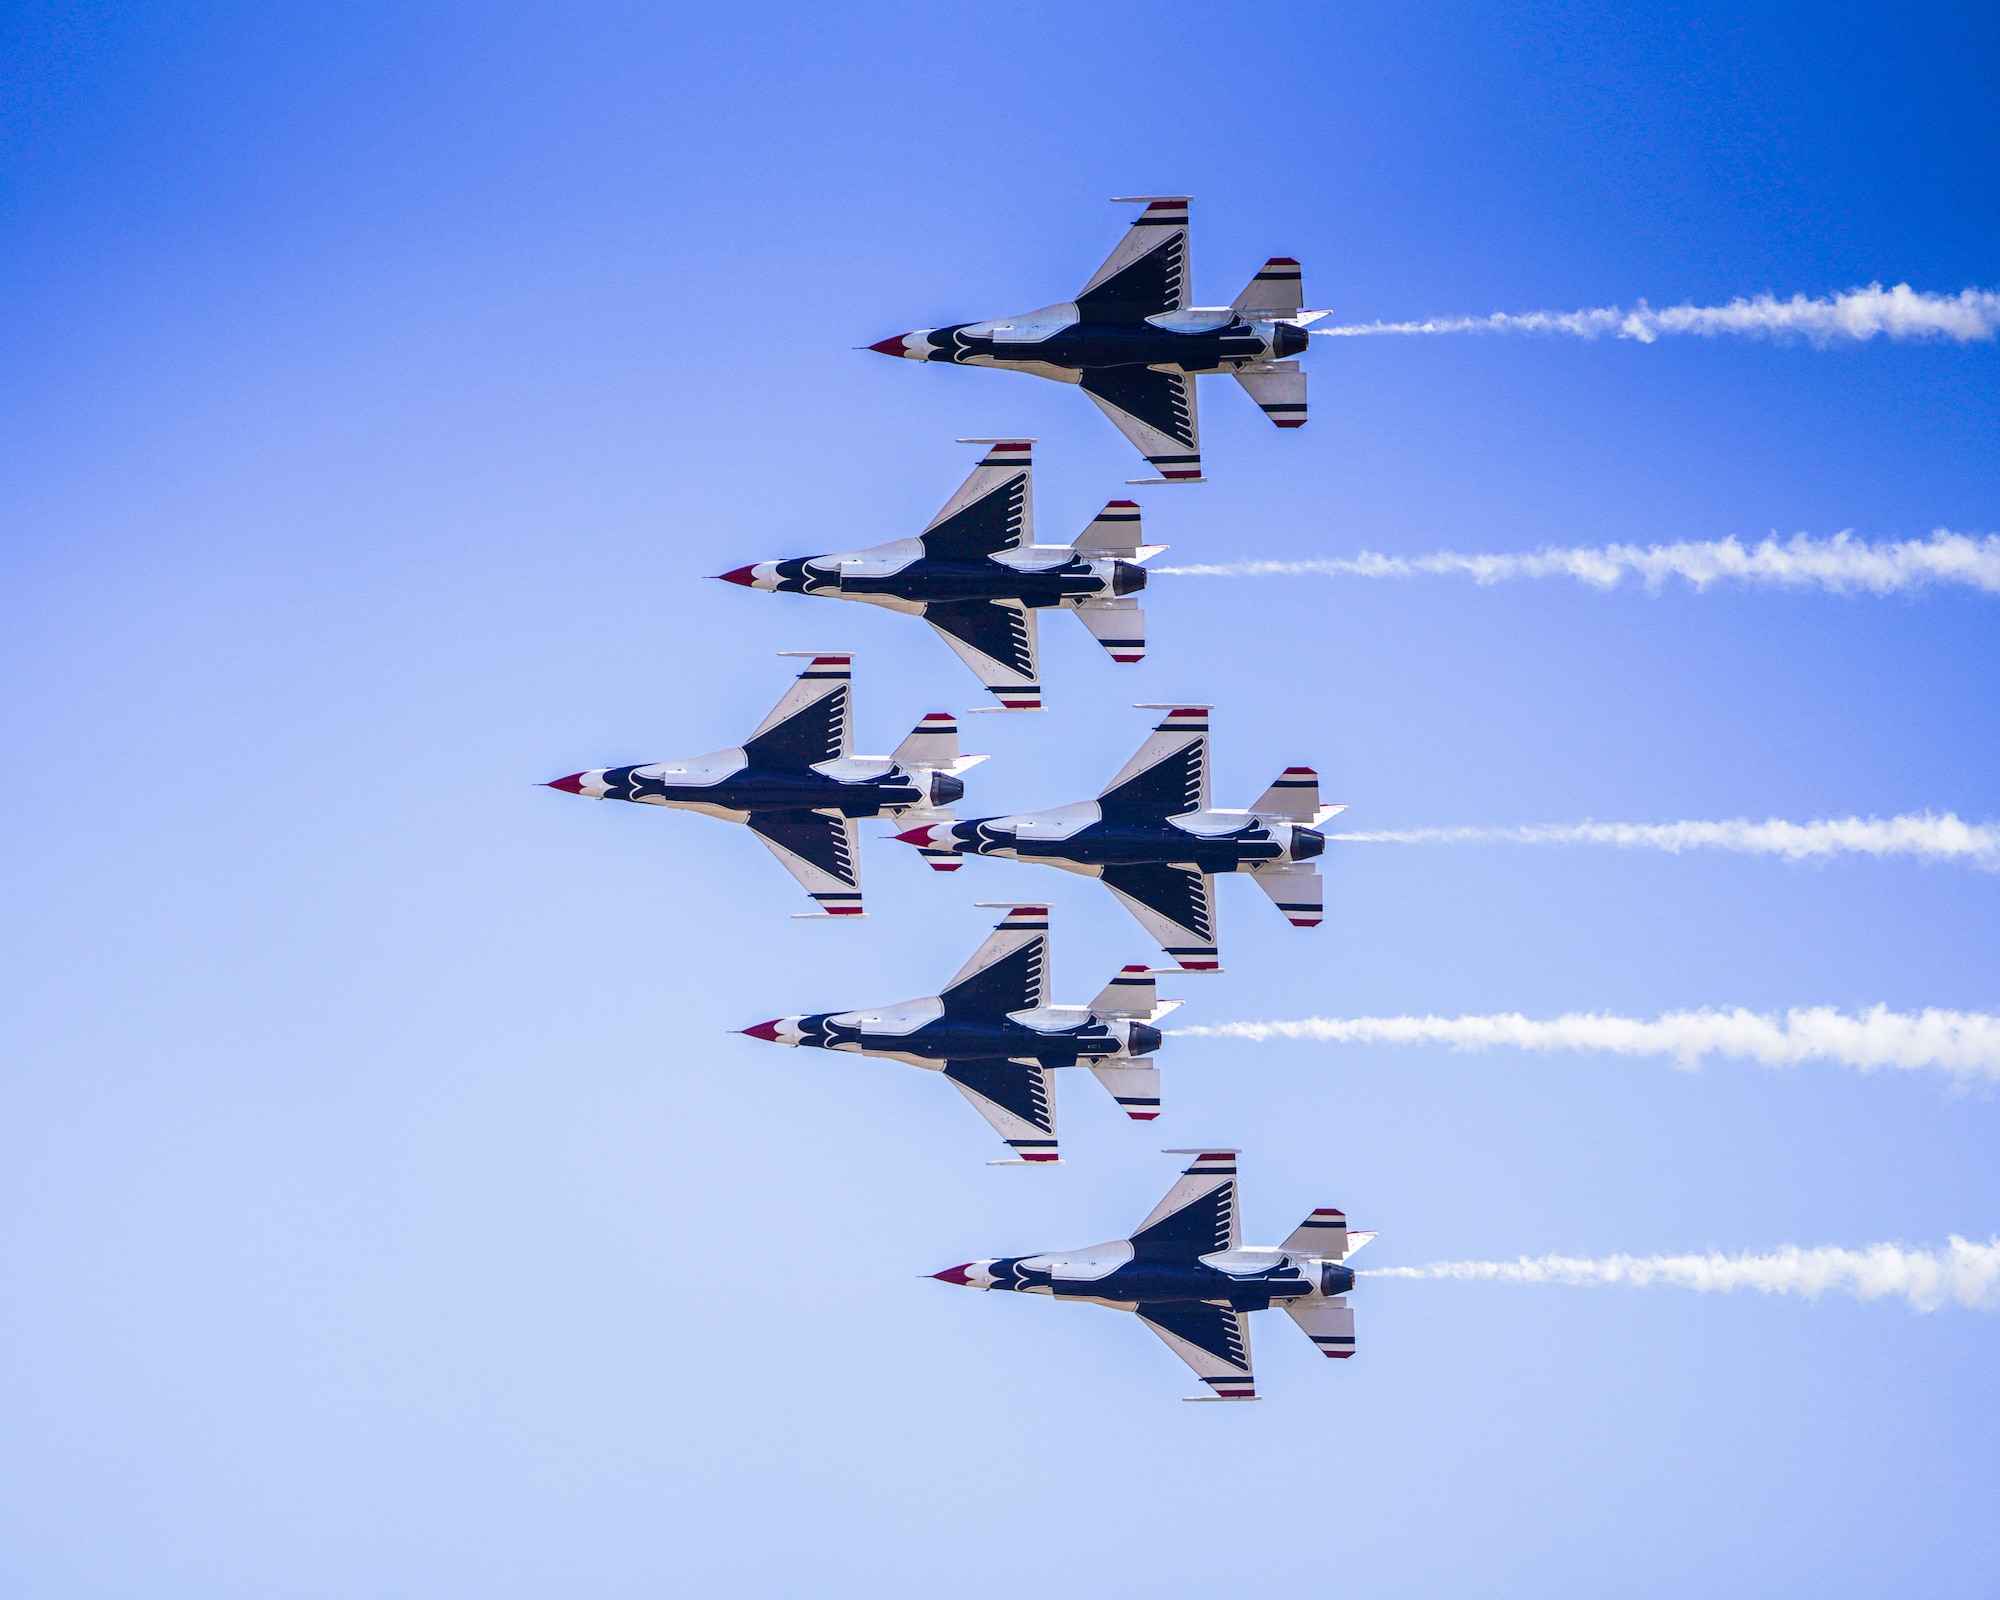 The United States Air Force Air Demonstration team “Thunderbirds” execute a carefully choreographed demonstration at the California Capital Air Show Sept. 23, 2023, in Rancho Cordova, California.